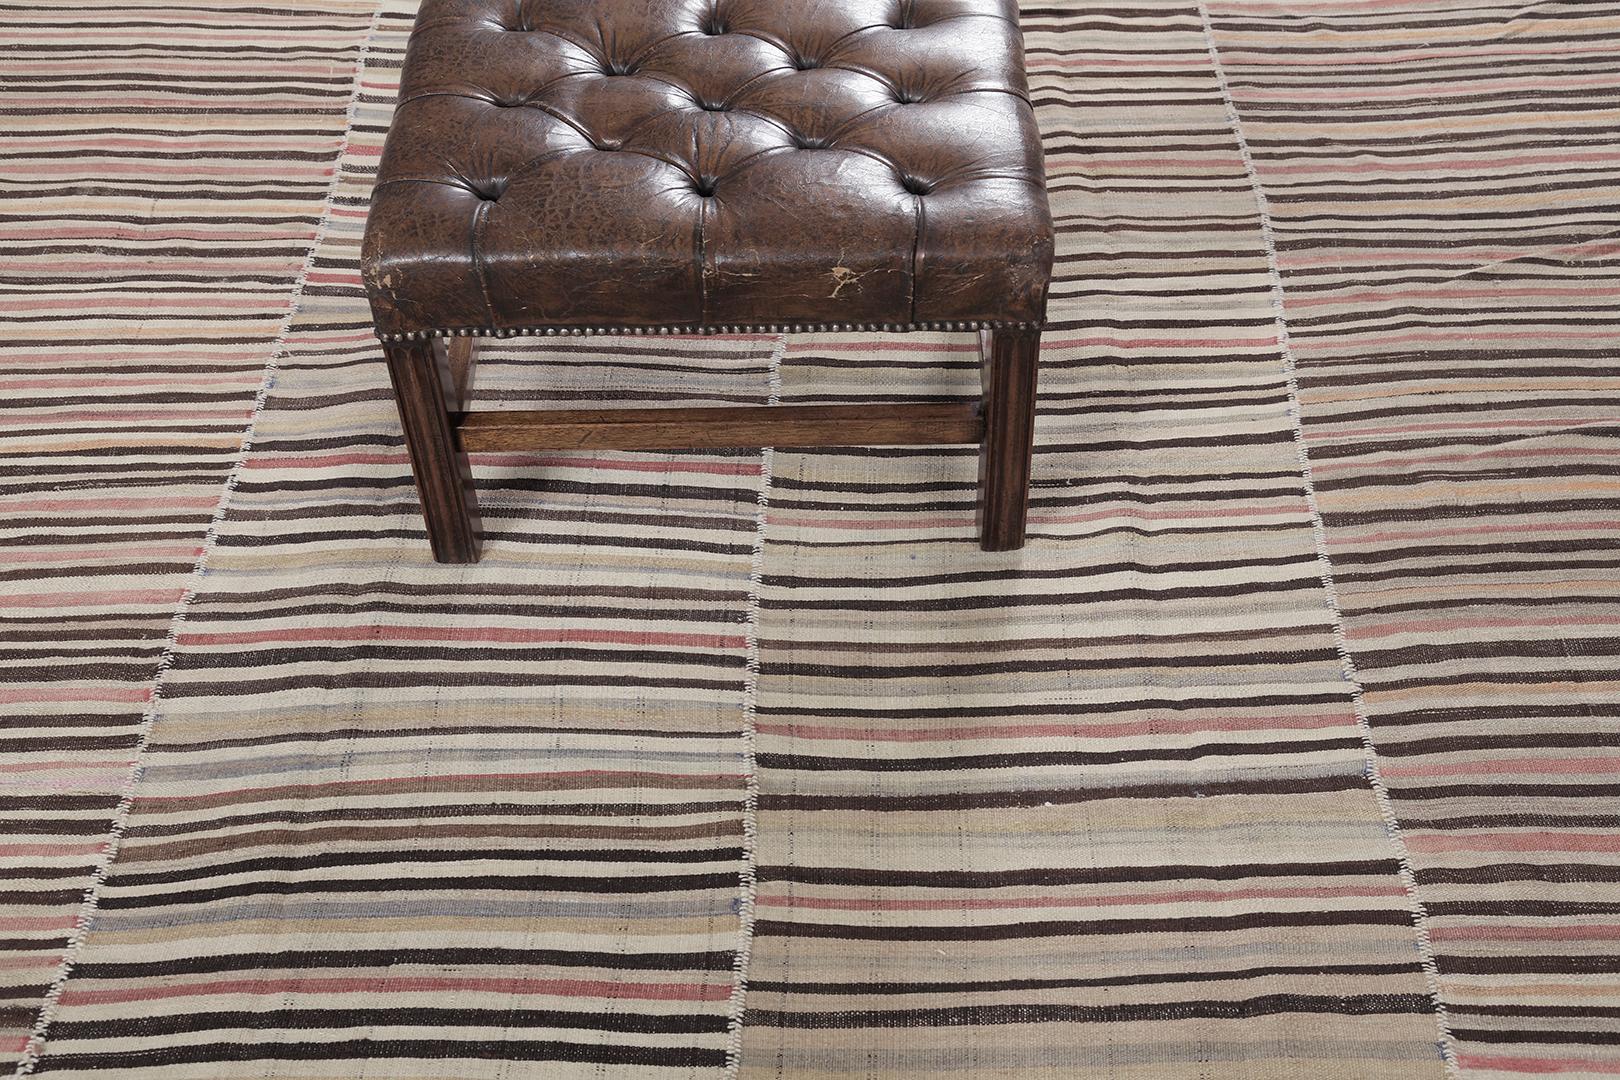 This Persian Jejim Kilim is a banded flat weave with alternating hues of red, ivory, khaki, and clay brown in multi-column stripes. Persian flatweaves are made up of some of the best wool and weaved exceptionally to create interesting textures. This